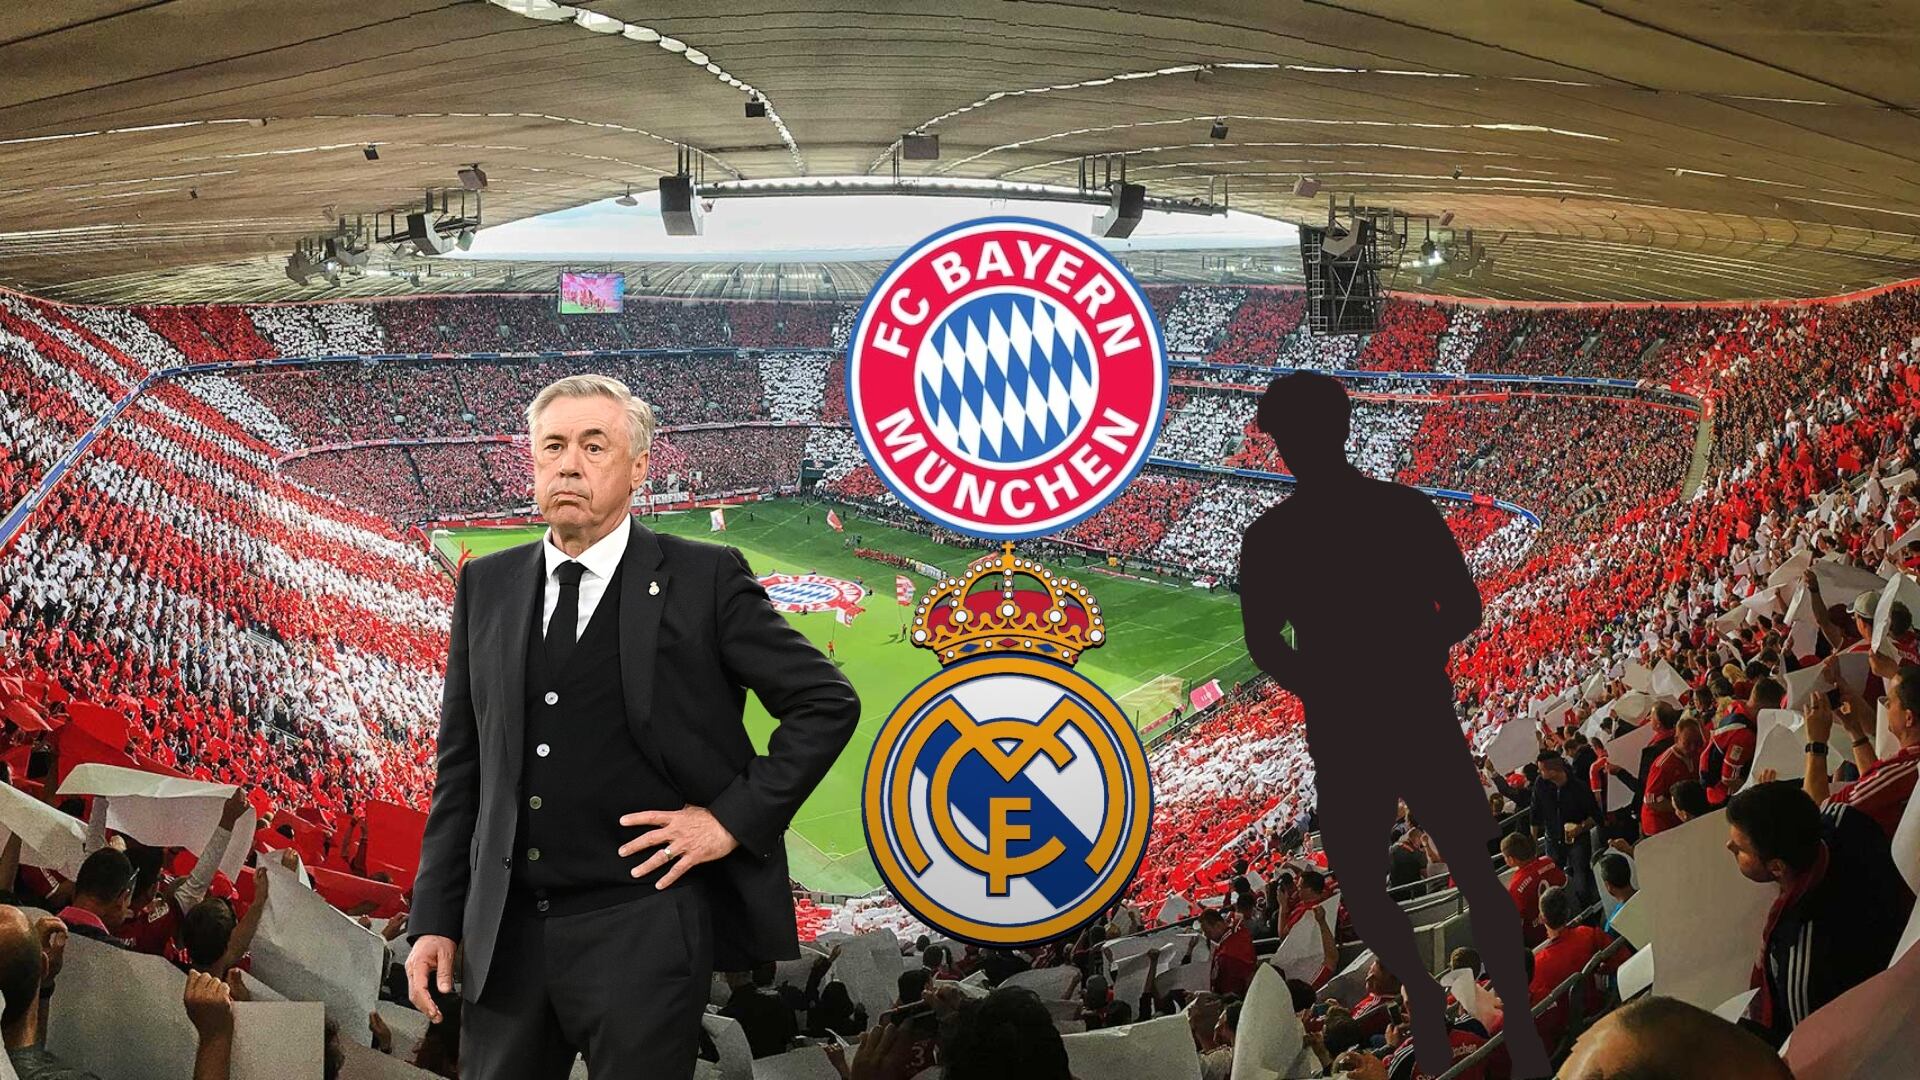 The unusual reason why Ancelotti took a 20 year old player who hasn't debuted yet with Real Madrid to Munich 